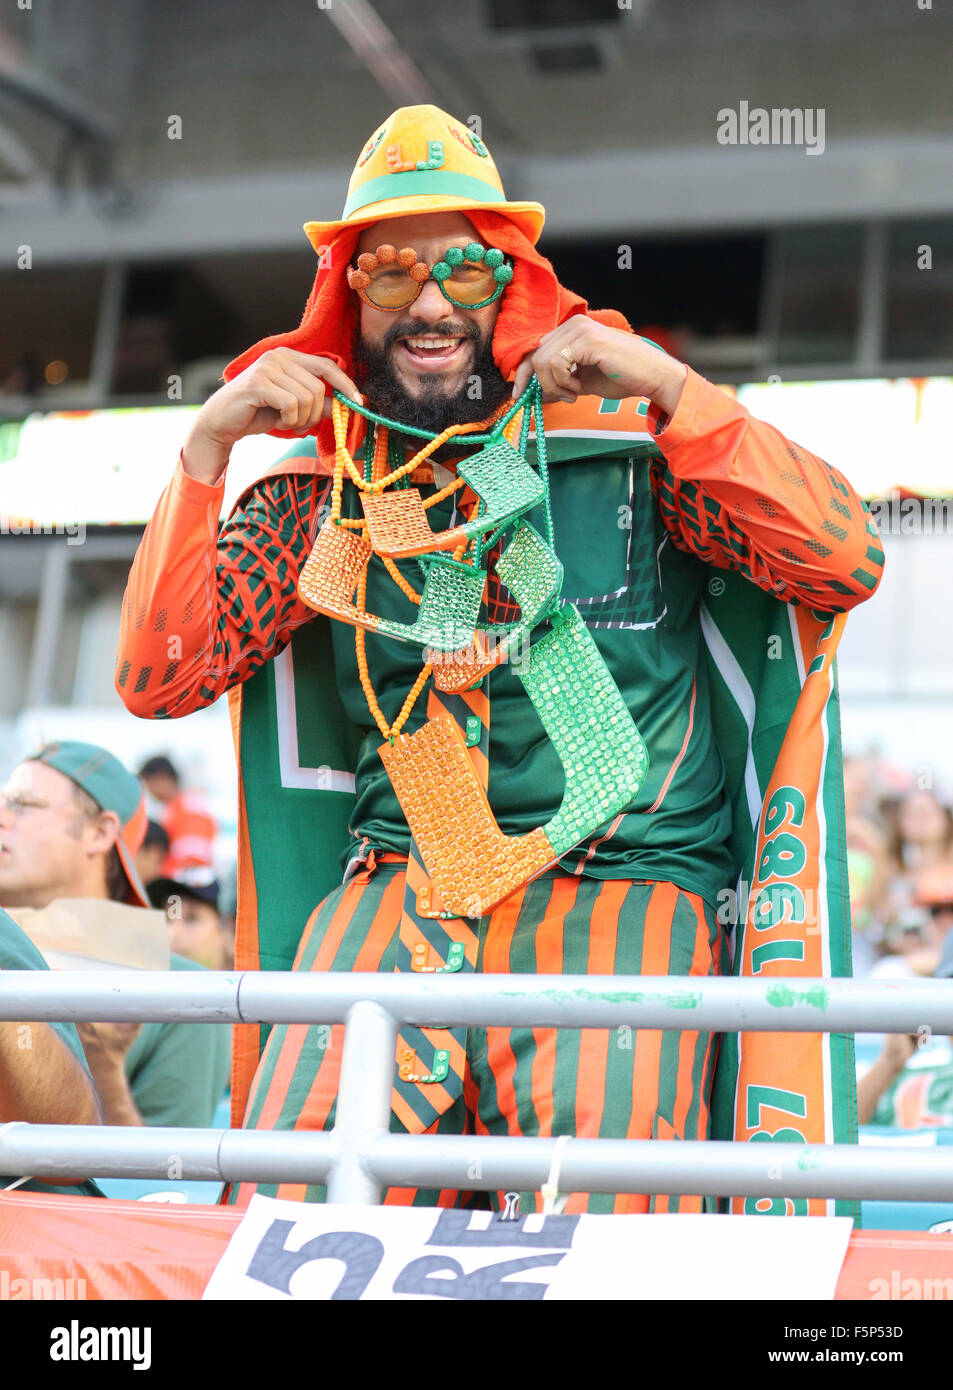 Miami Gardens, FL, USA. 7th Nov, 2015. An enthusiastic Maimi fan in the stands during the NCAA football game between the Miami Hurricanes and the Virginia Cavaliers at Sun Life Stadium in Miami Gardens, FL. Kyle Okita/CSM/Alamy Live News Stock Photo